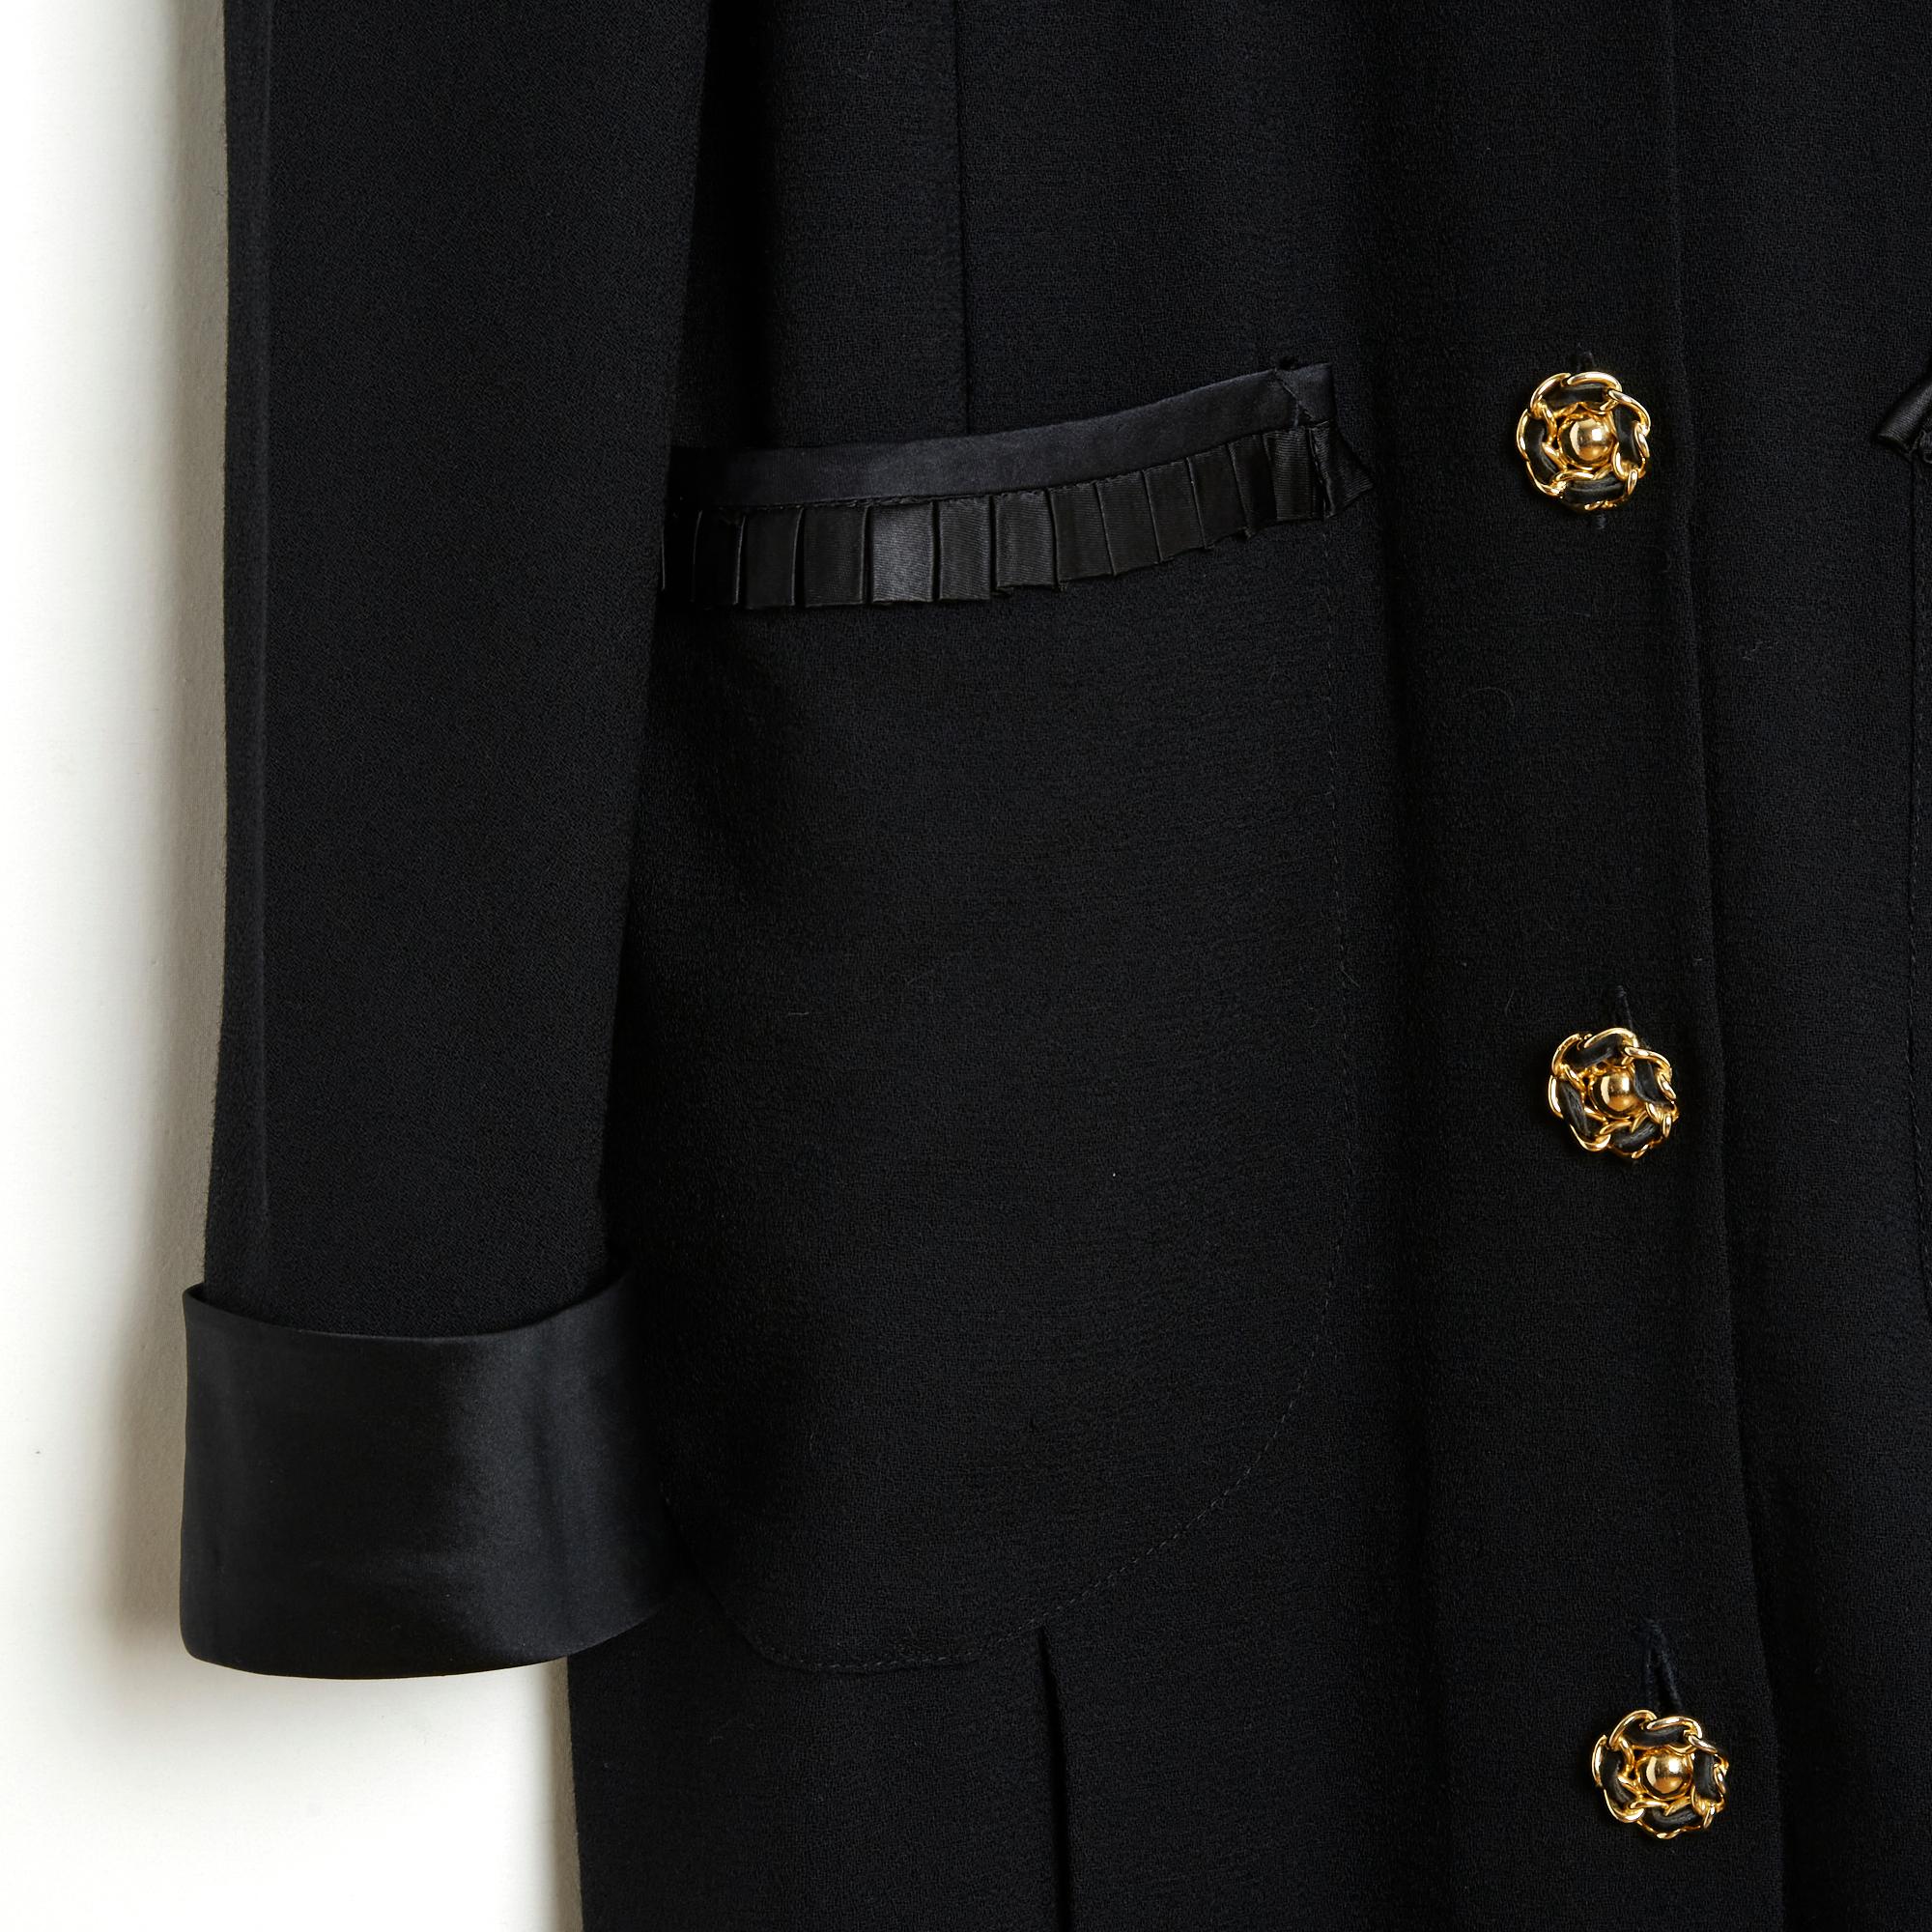 Chanel dress coat circa 1990 in black wool crepe, ankle length, high collar in wide black silk satin ribbon, closed in front with 7 buttons including 6 interwoven with black leather and 1 faceted highlighted with a brooch with the motif of a large